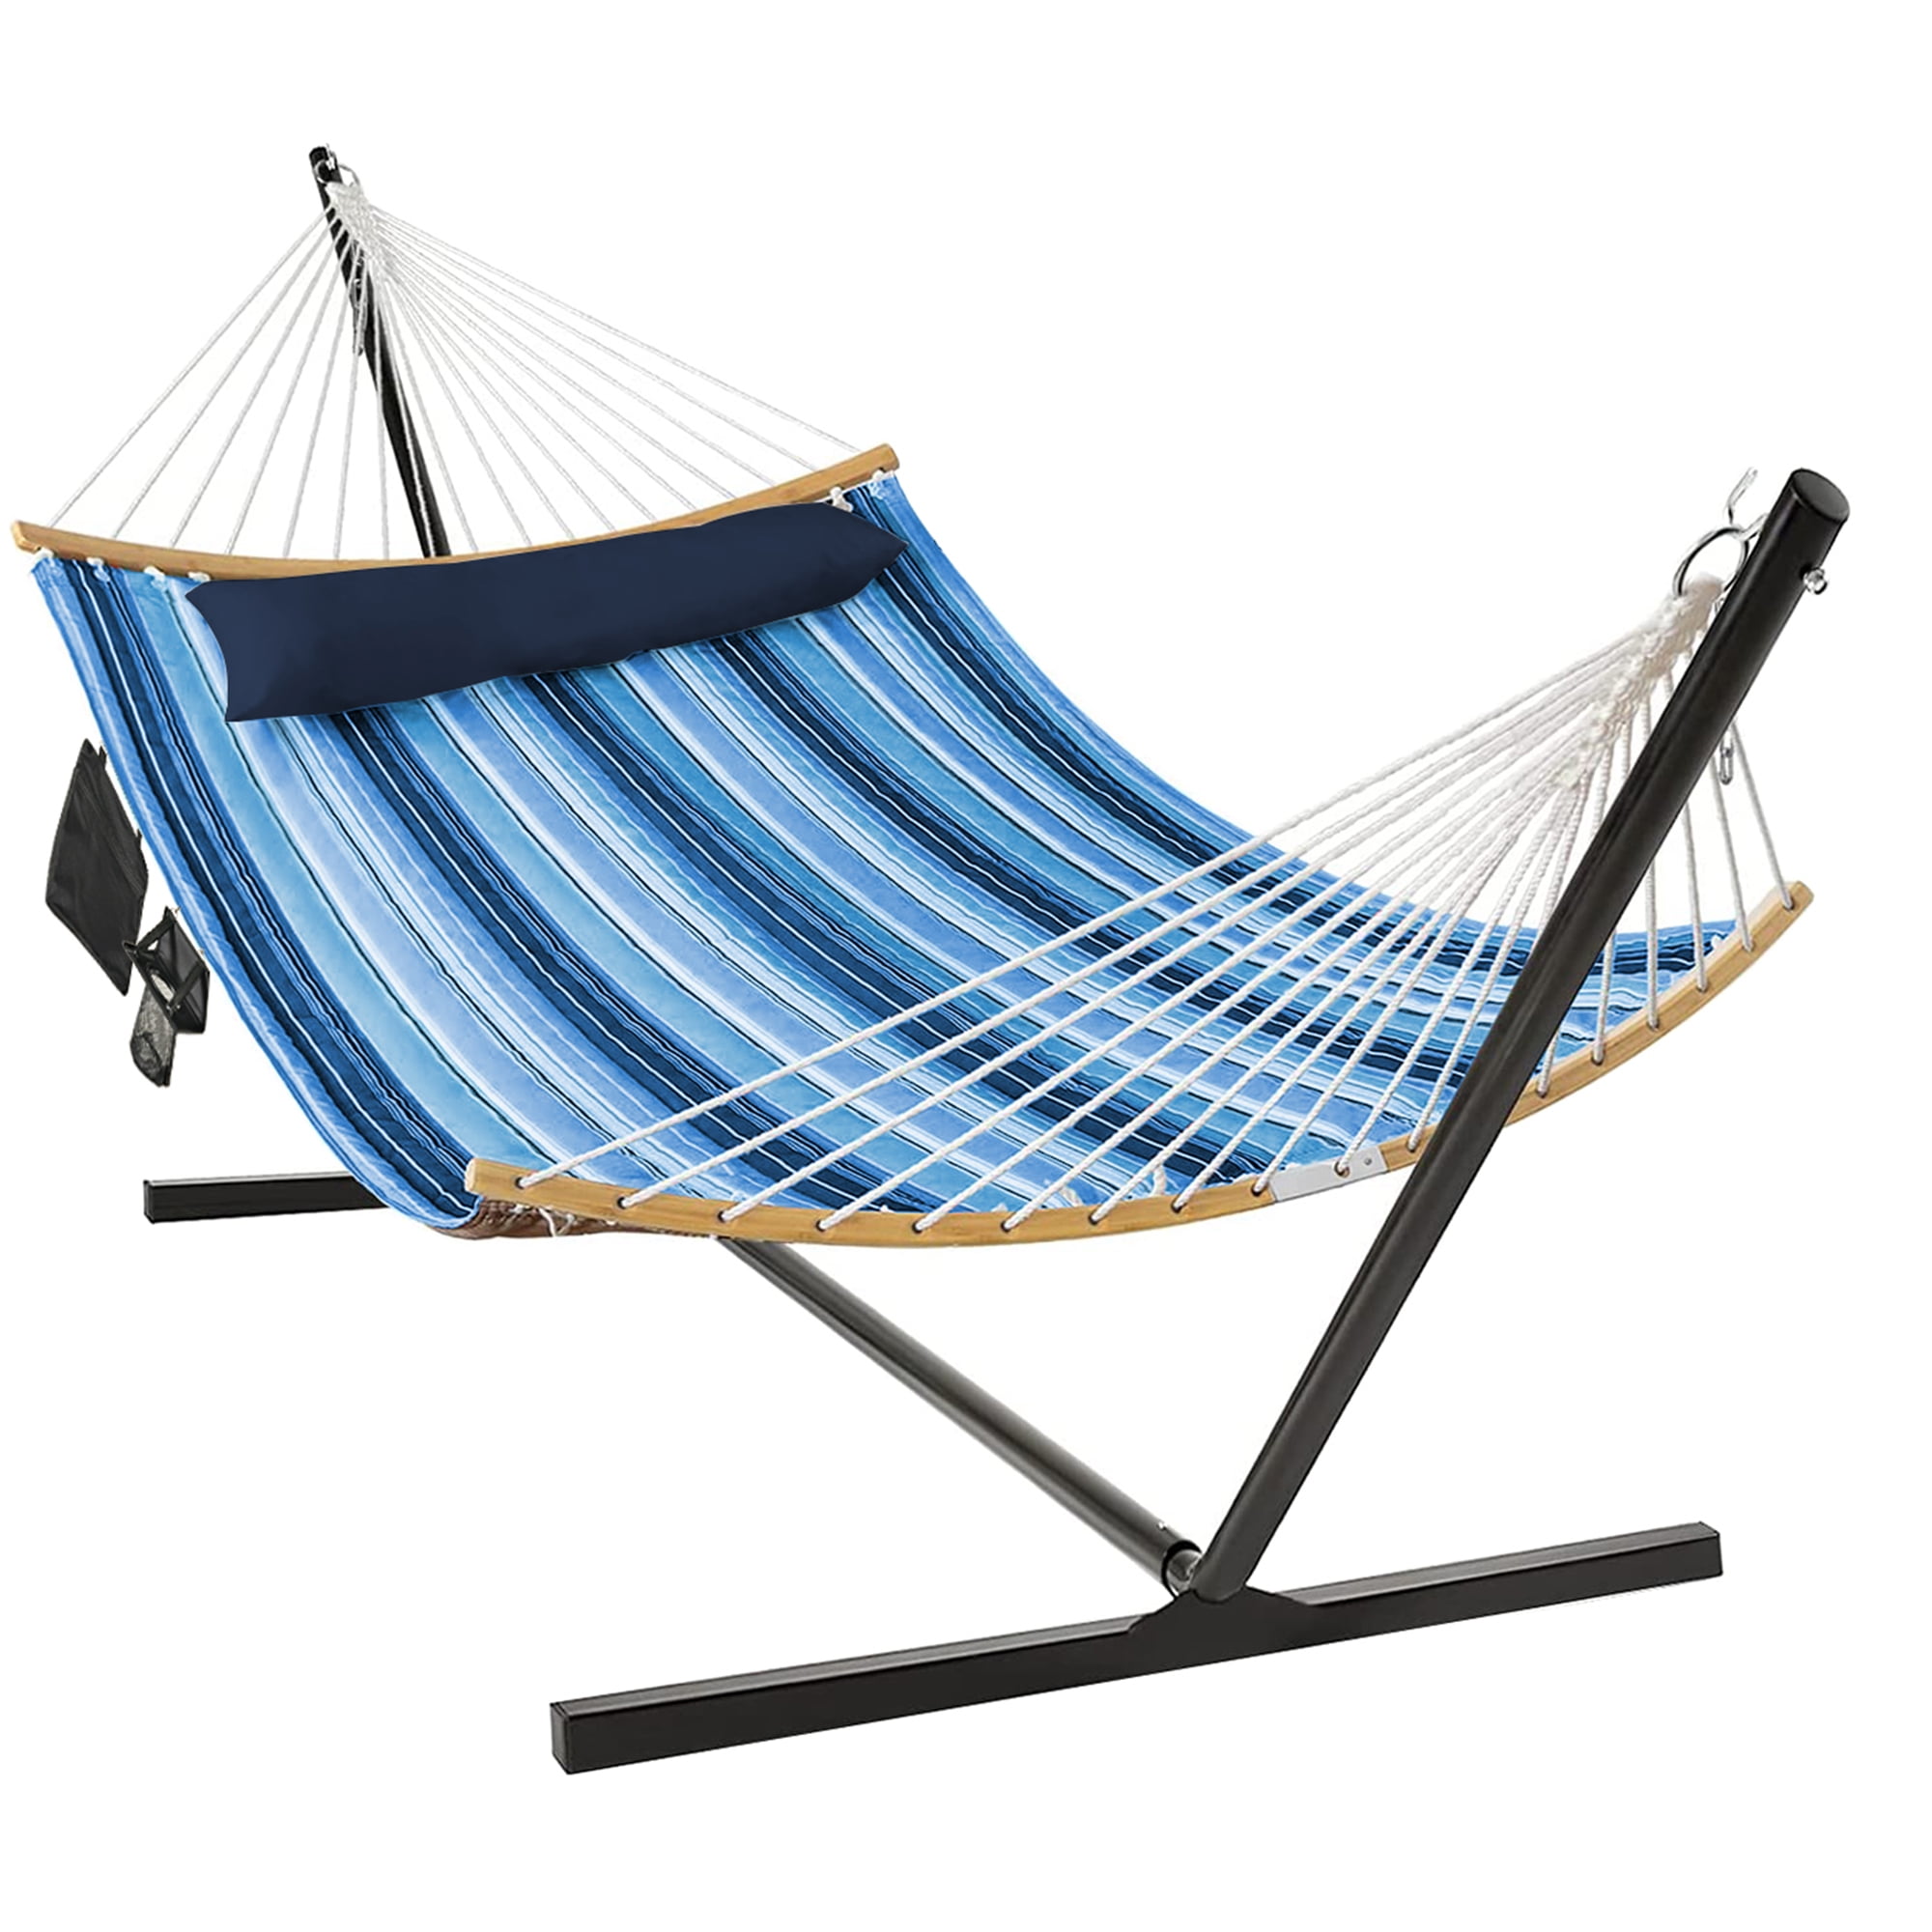 HAPPYGRILL Adjustable Hammock Stand Height 78.5 to 98.5 Hammock Stand for Hammock Air Porch Swing Chair 